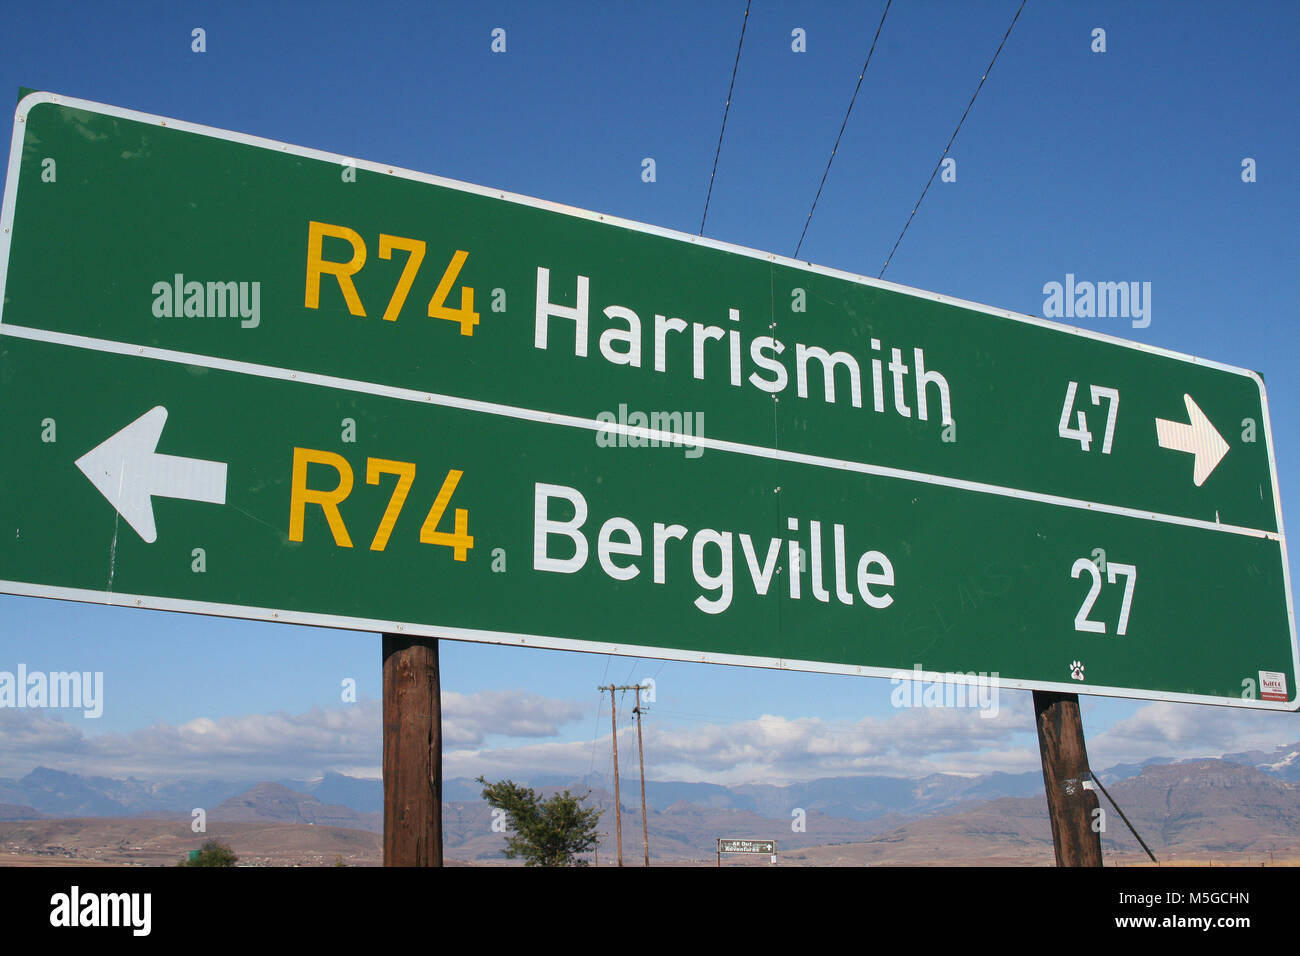 Road sign showing R74 to Harrismith and R74 to Bergville, Drakensburg, South Africa Stock Photo